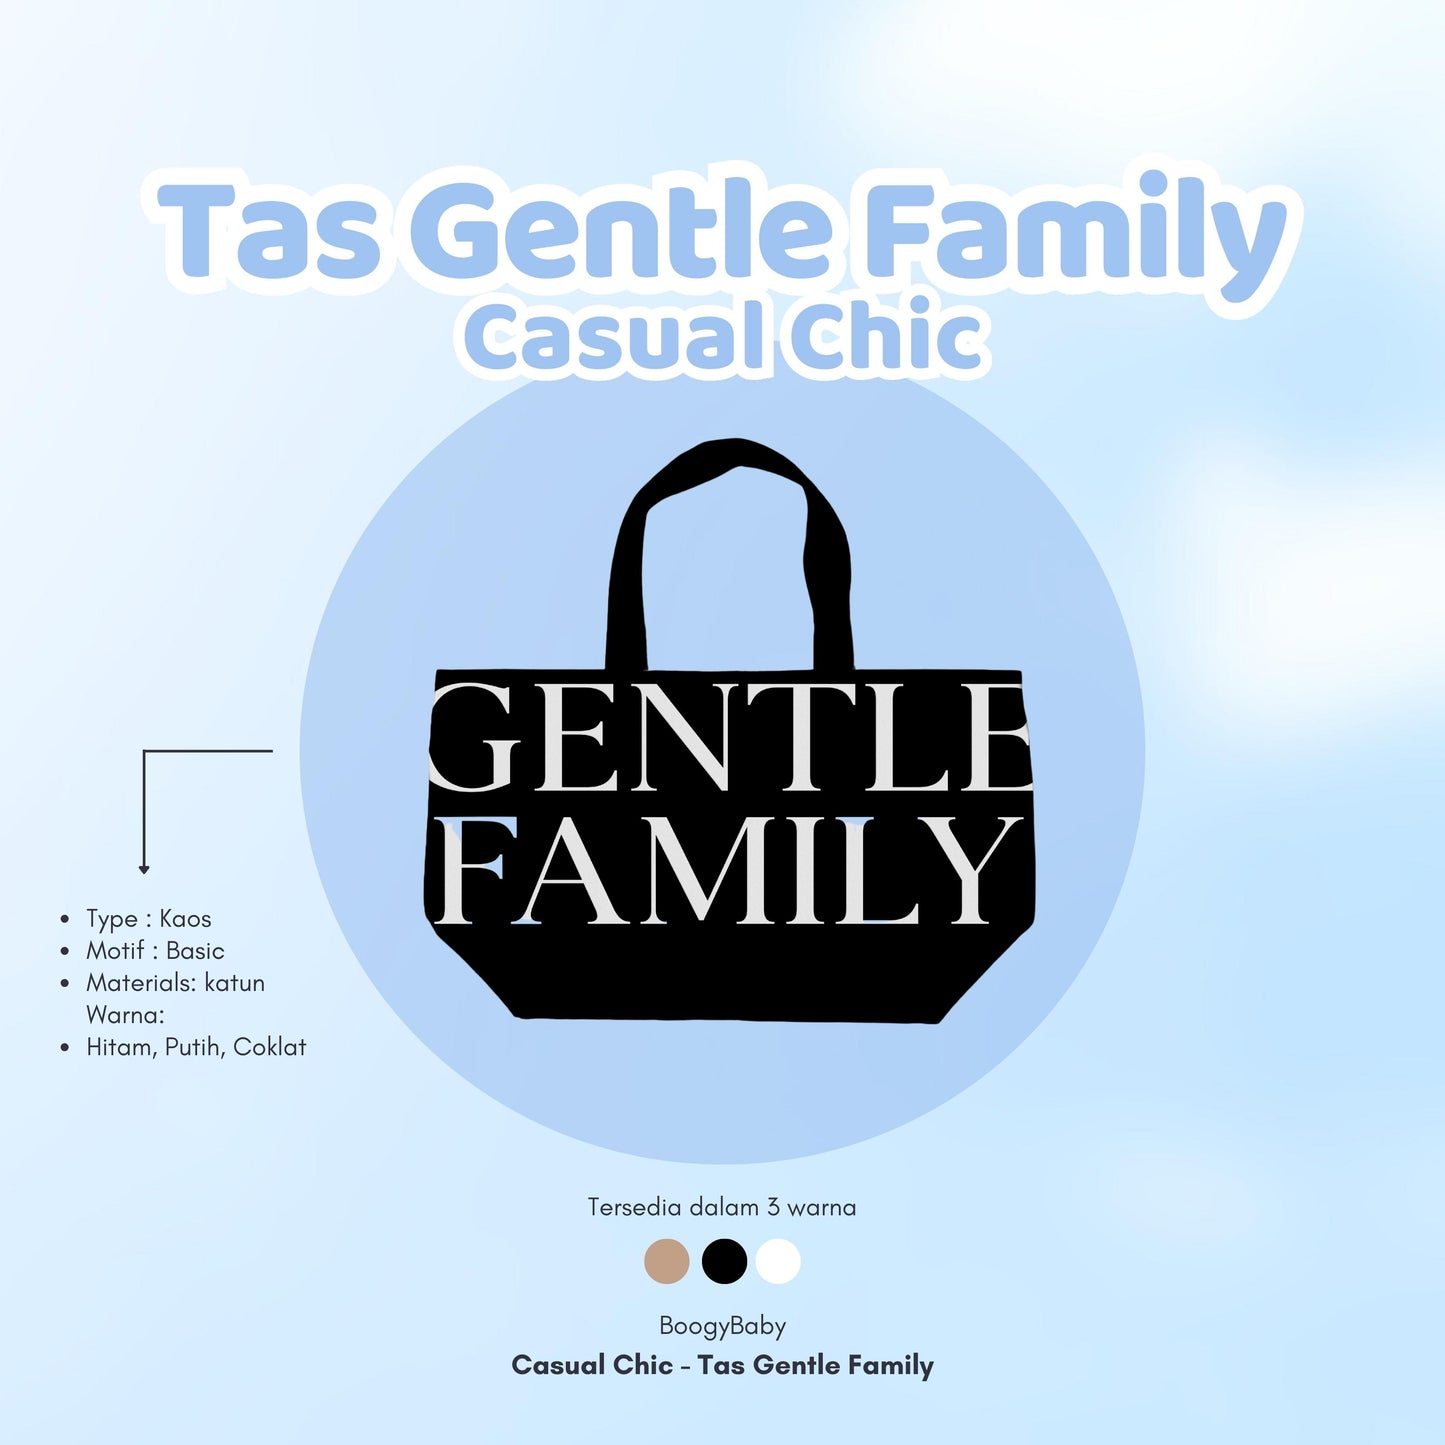 Tas Gentle Family (Casual Chic)